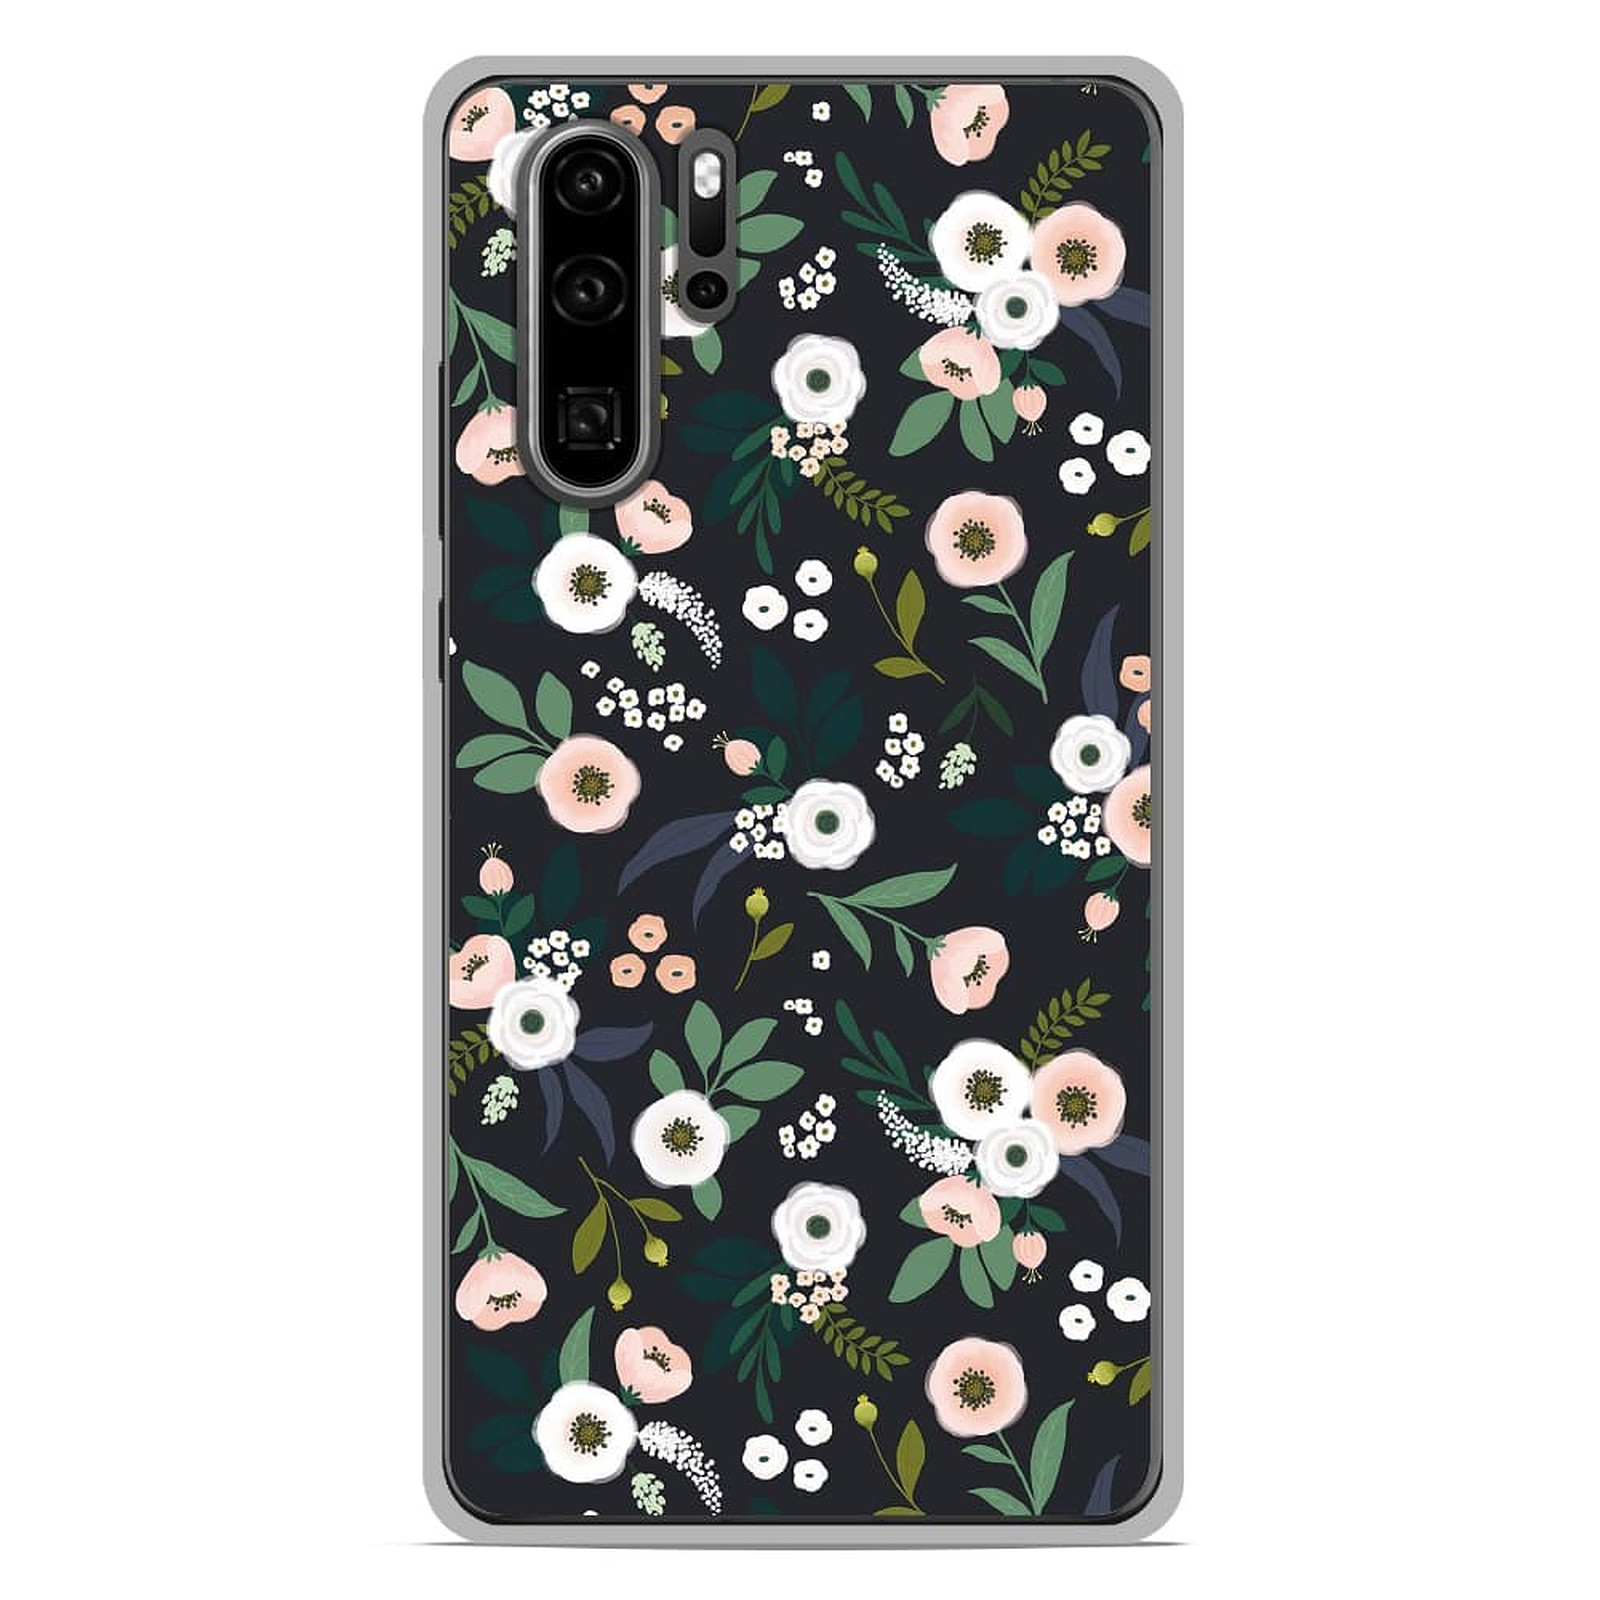 1001 Coques Coque silicone gel Huawei P30 Pro motif Flowers Noir - Coque telephone 1001Coques